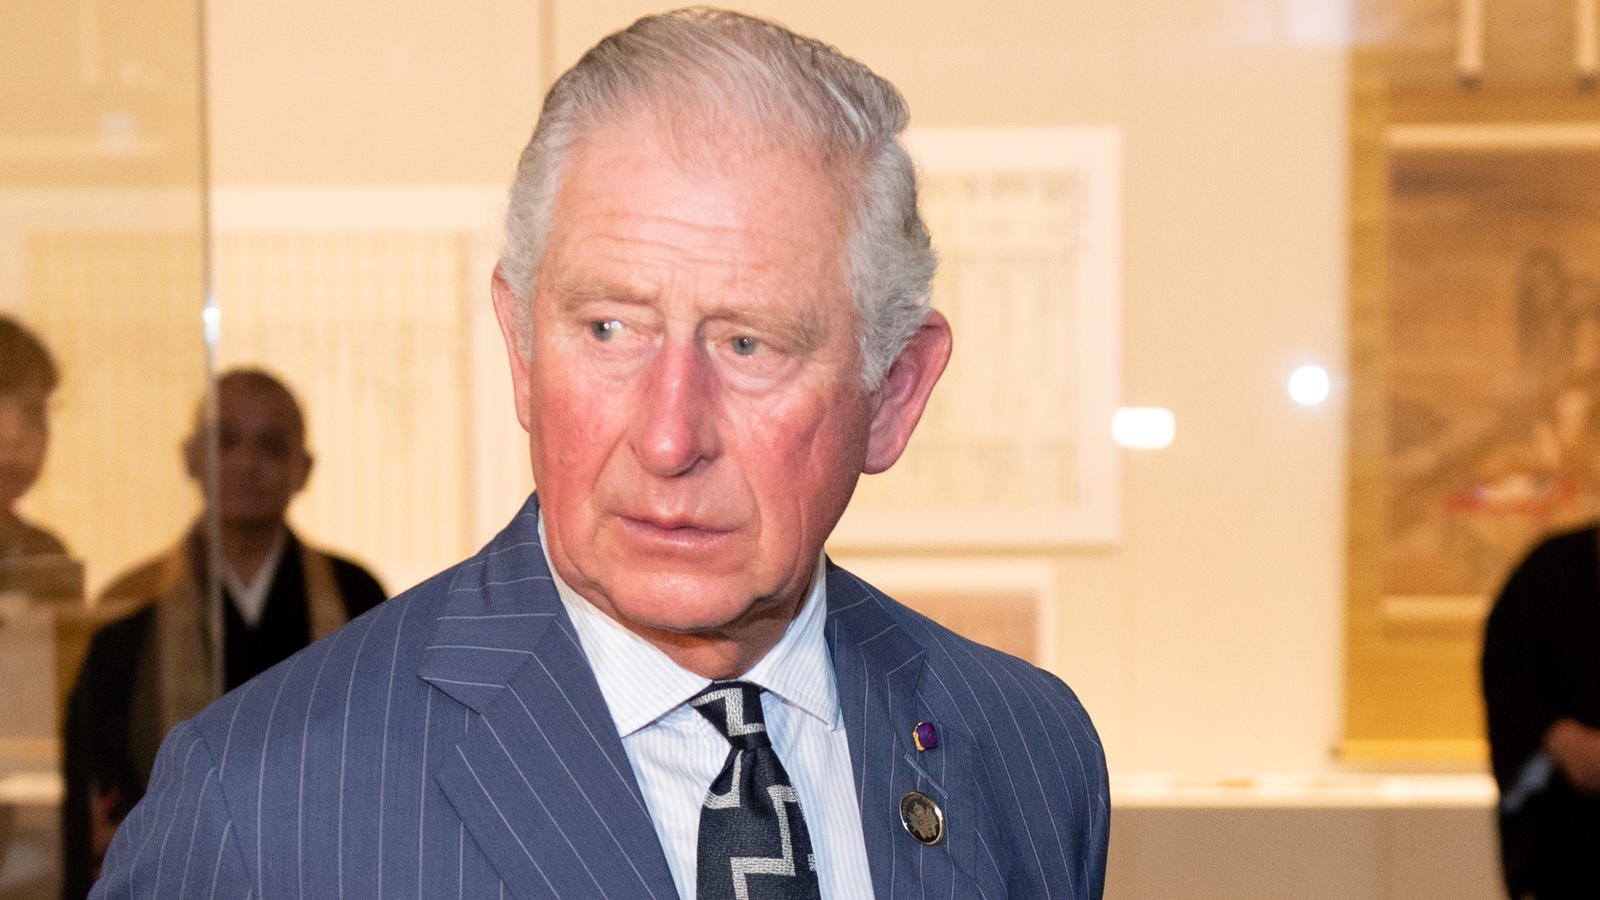 Prince Charles, the Prince of Wales visits Zojoji Temple in Tokyo, Japan.Pictured: Prince CharlesRef: SPL5123952 231019 NON-EXCLUSIVEPicture by: SplashNews.comSplash News and PicturesLos Angeles: 310-821-2666New York: 212-619-2666London: +44 (0)20 76